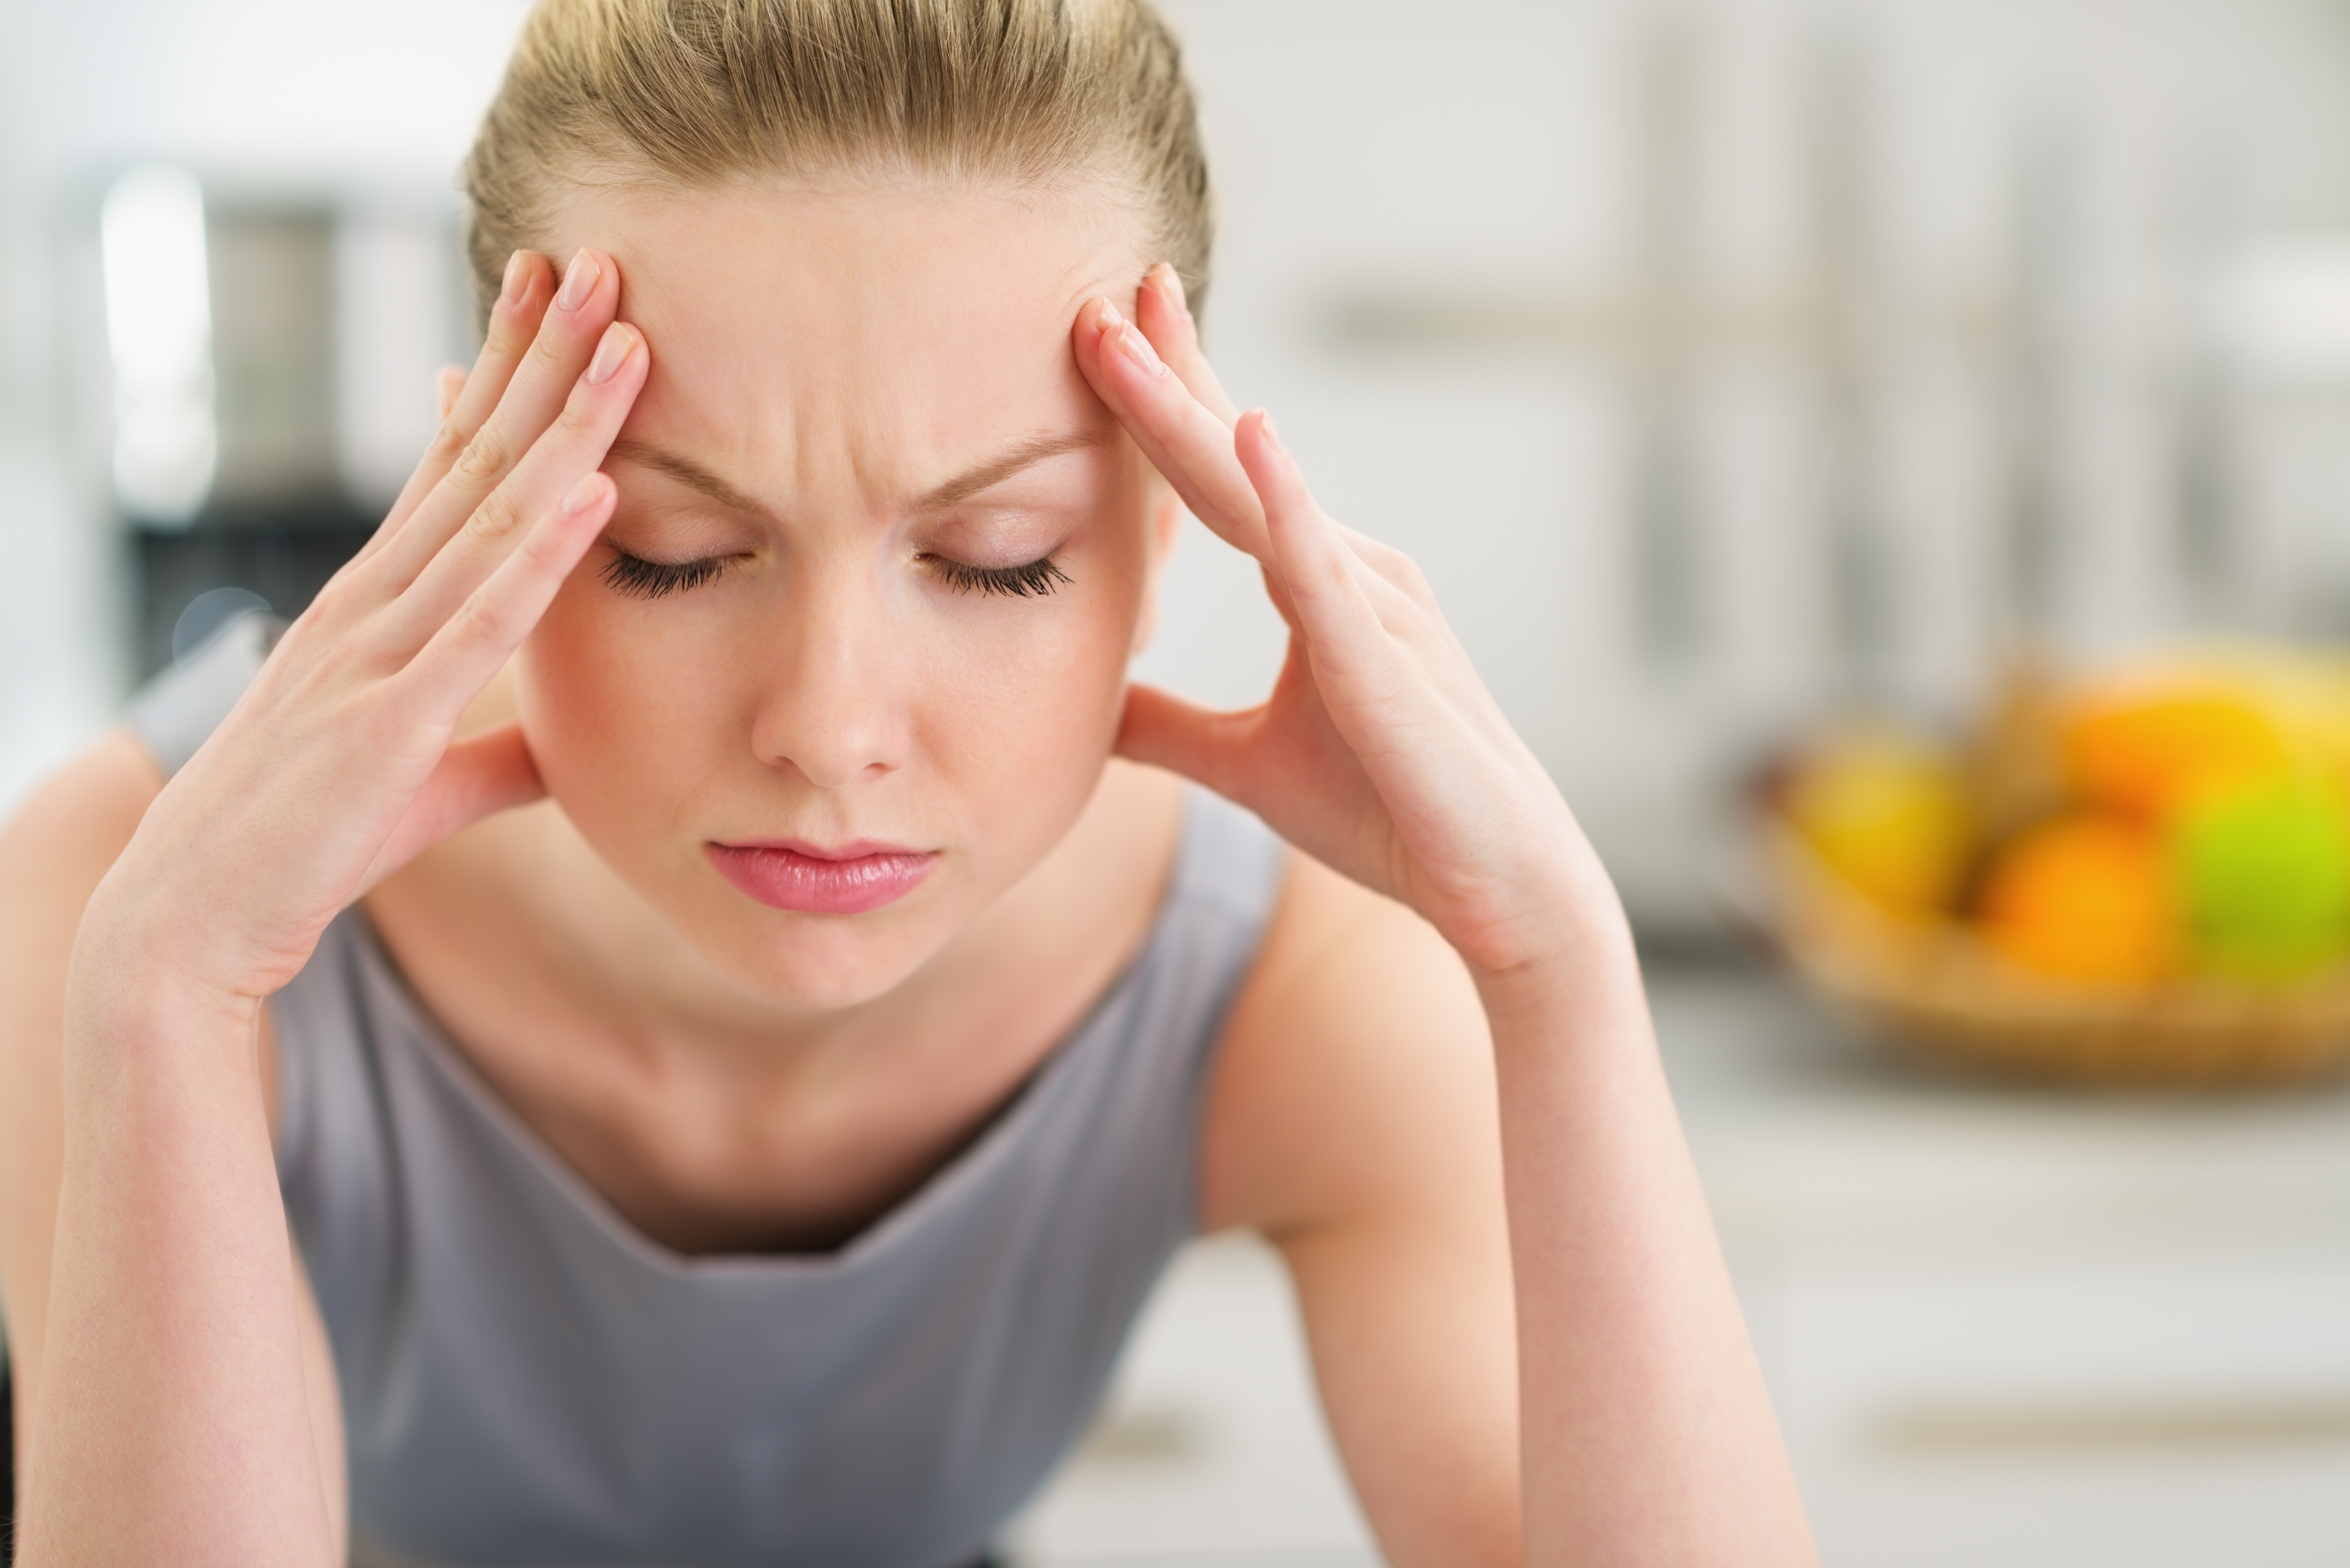 Do you need to see a Florida Headache Treatment Specialist?